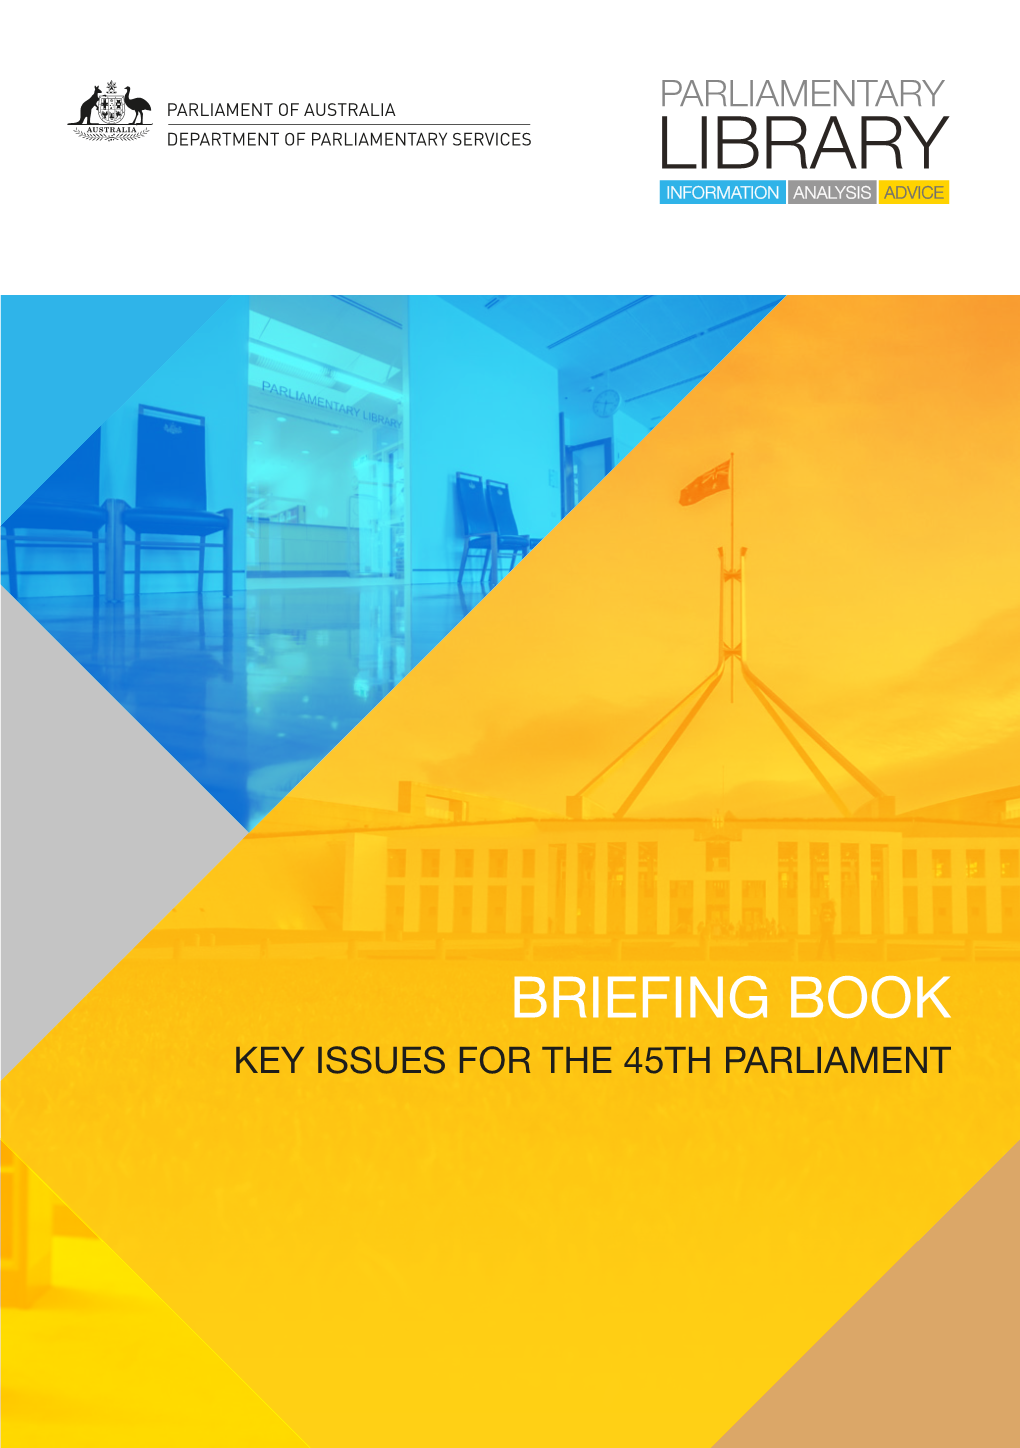 BRIEFING BOOK KEY ISSUES for the 45TH PARLIAMENT © Commonwealth of Australia 2016